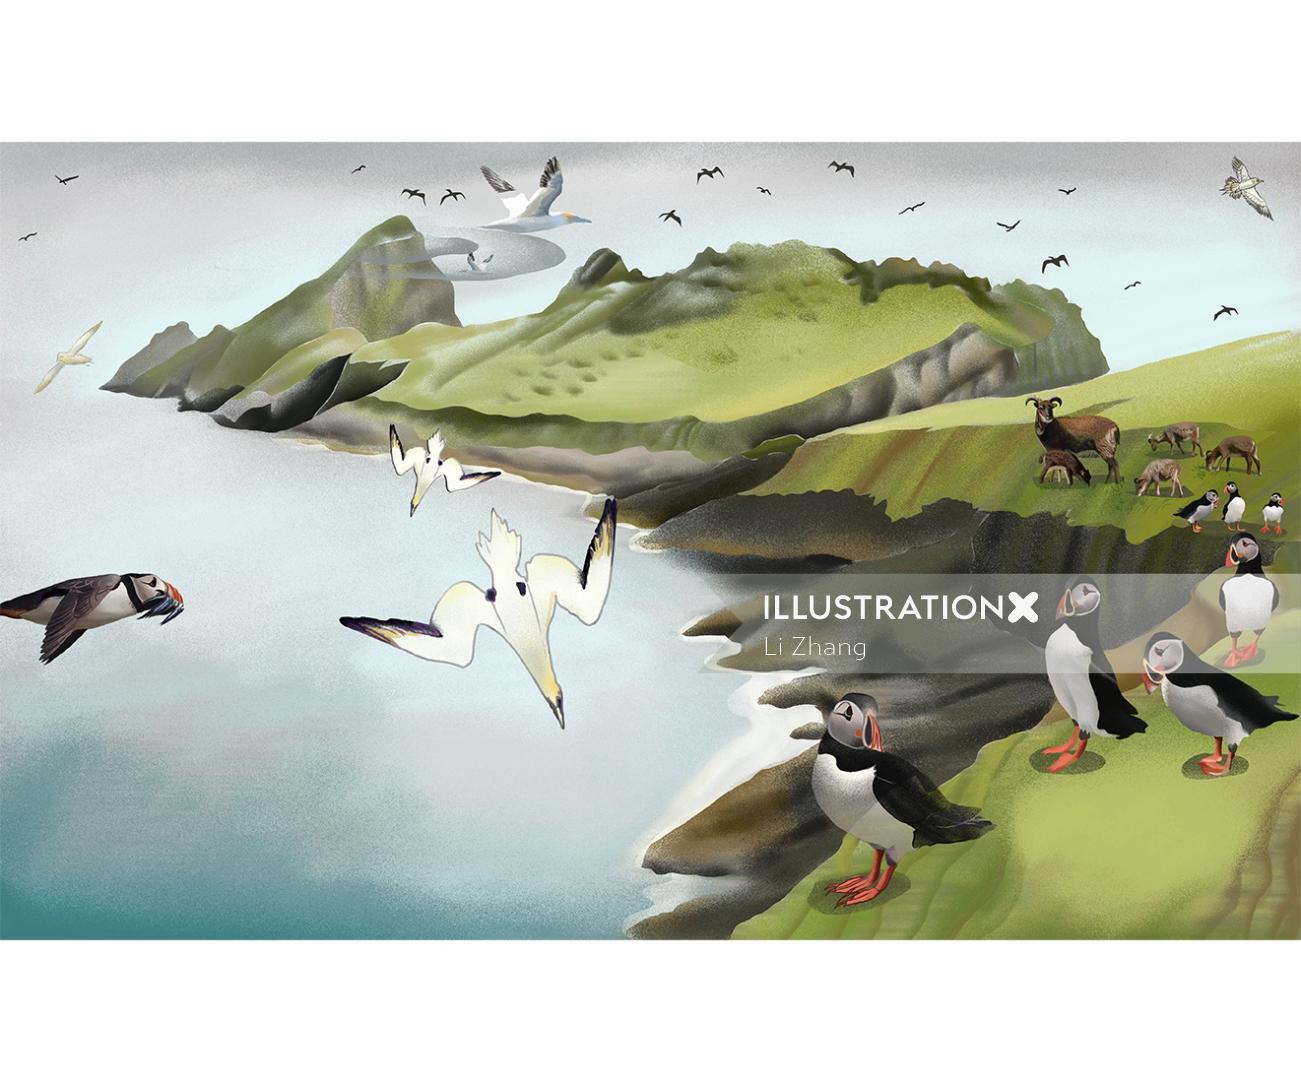 Pages illustration from my upcoming books "Islands": St Kilda, Scotland